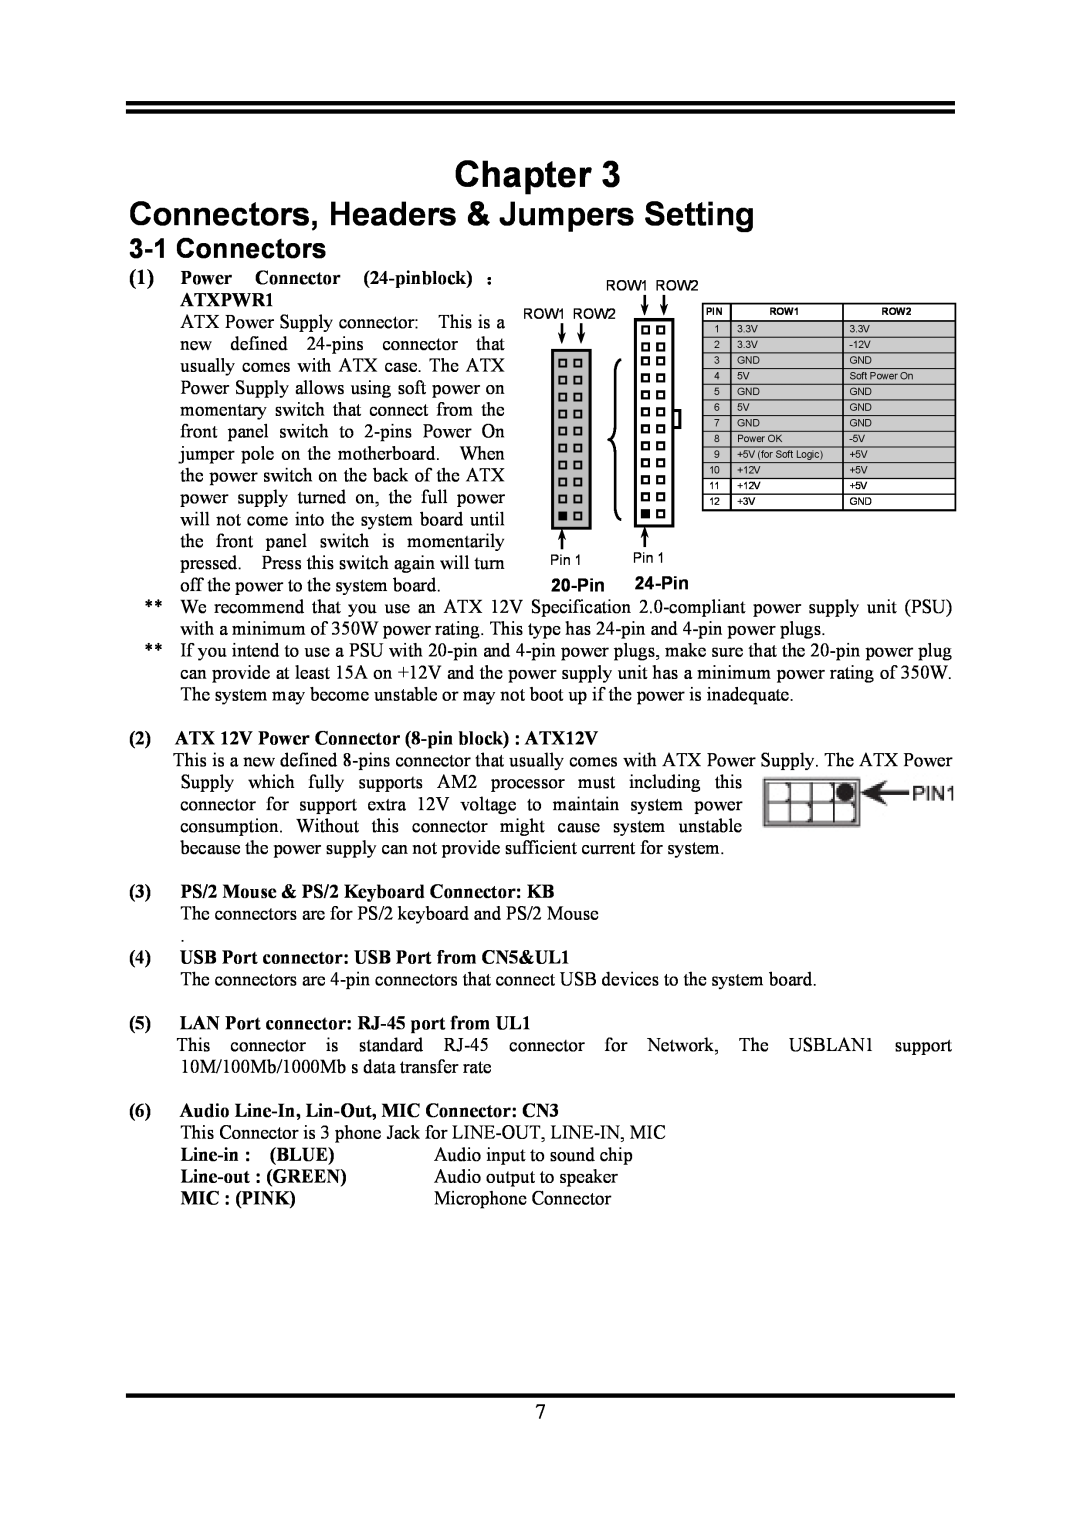 AMD KM780V user manual Connectors, Headers & Jumpers Setting, Chapter 